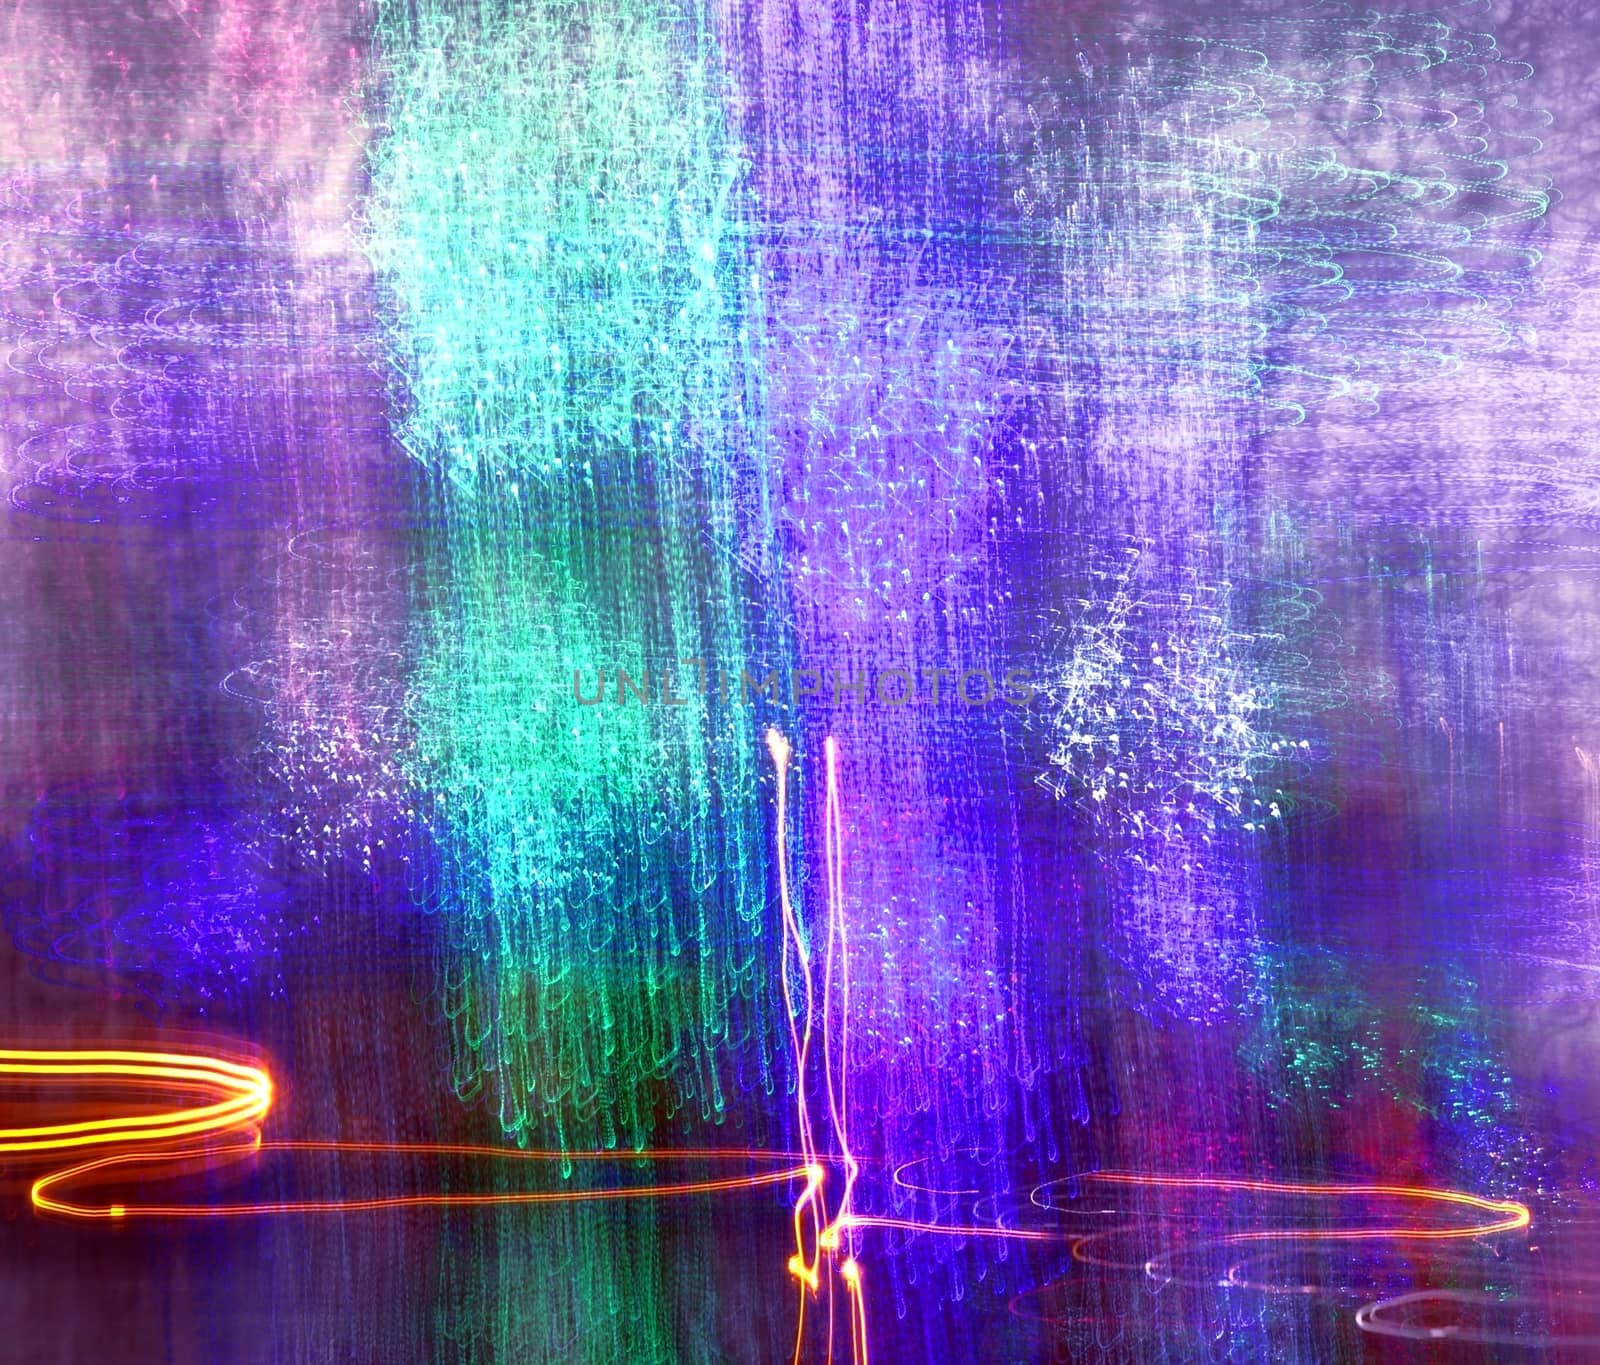 Abstract painting with light with a textured look and colors blue and green
